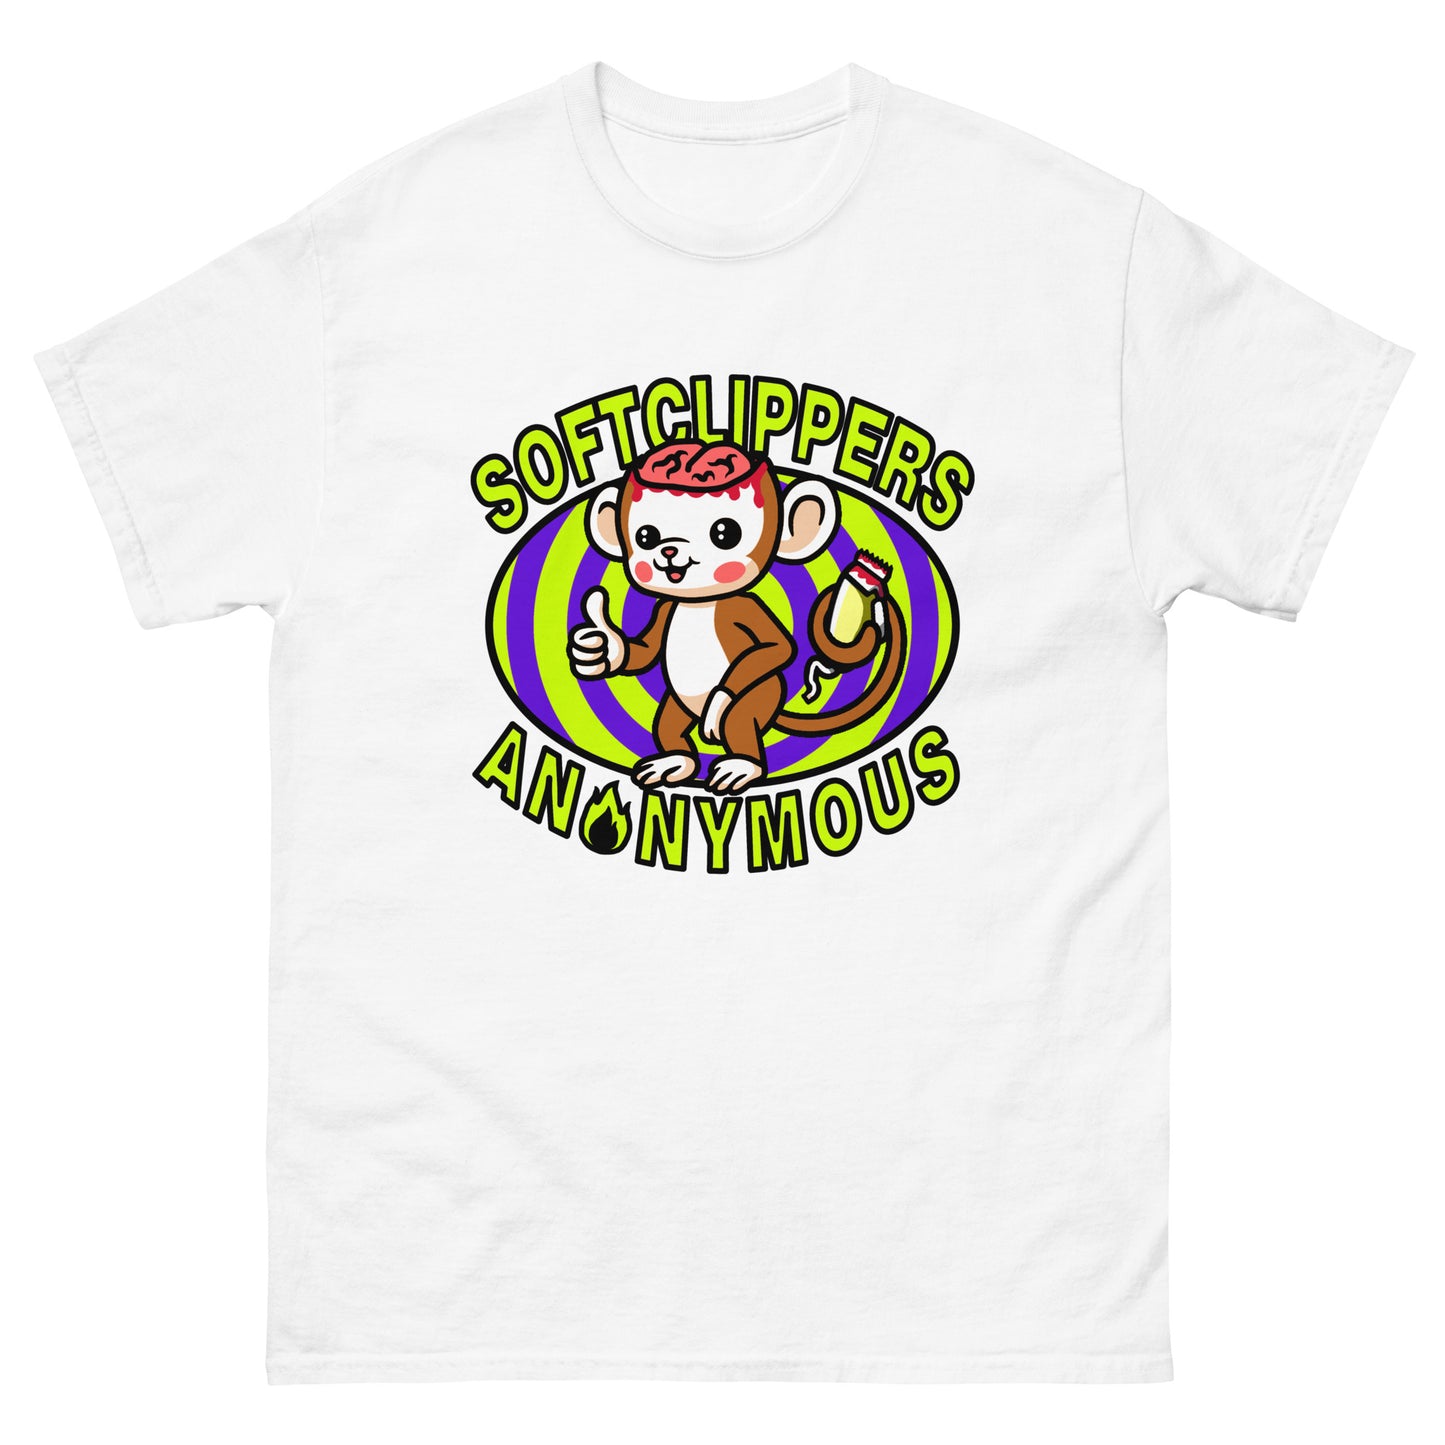 Softclippers Anonymous Tee